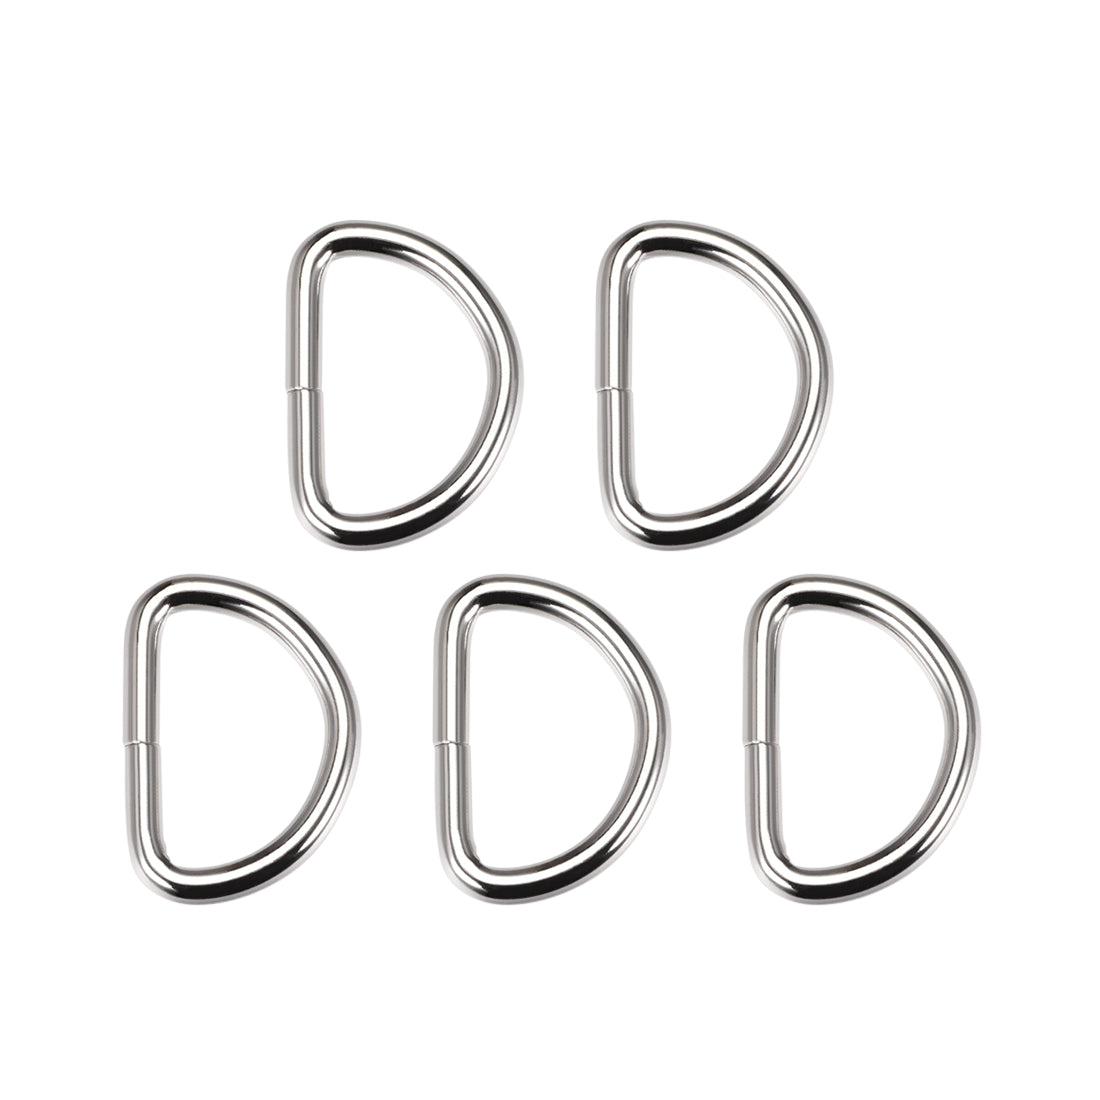 uxcell Uxcell 5 Pcs D Ring Buckle 1.26 Inch Metal Semi-Circular D-Rings Silver Tone for Hardware Bags Belts Craft DIY Accessories